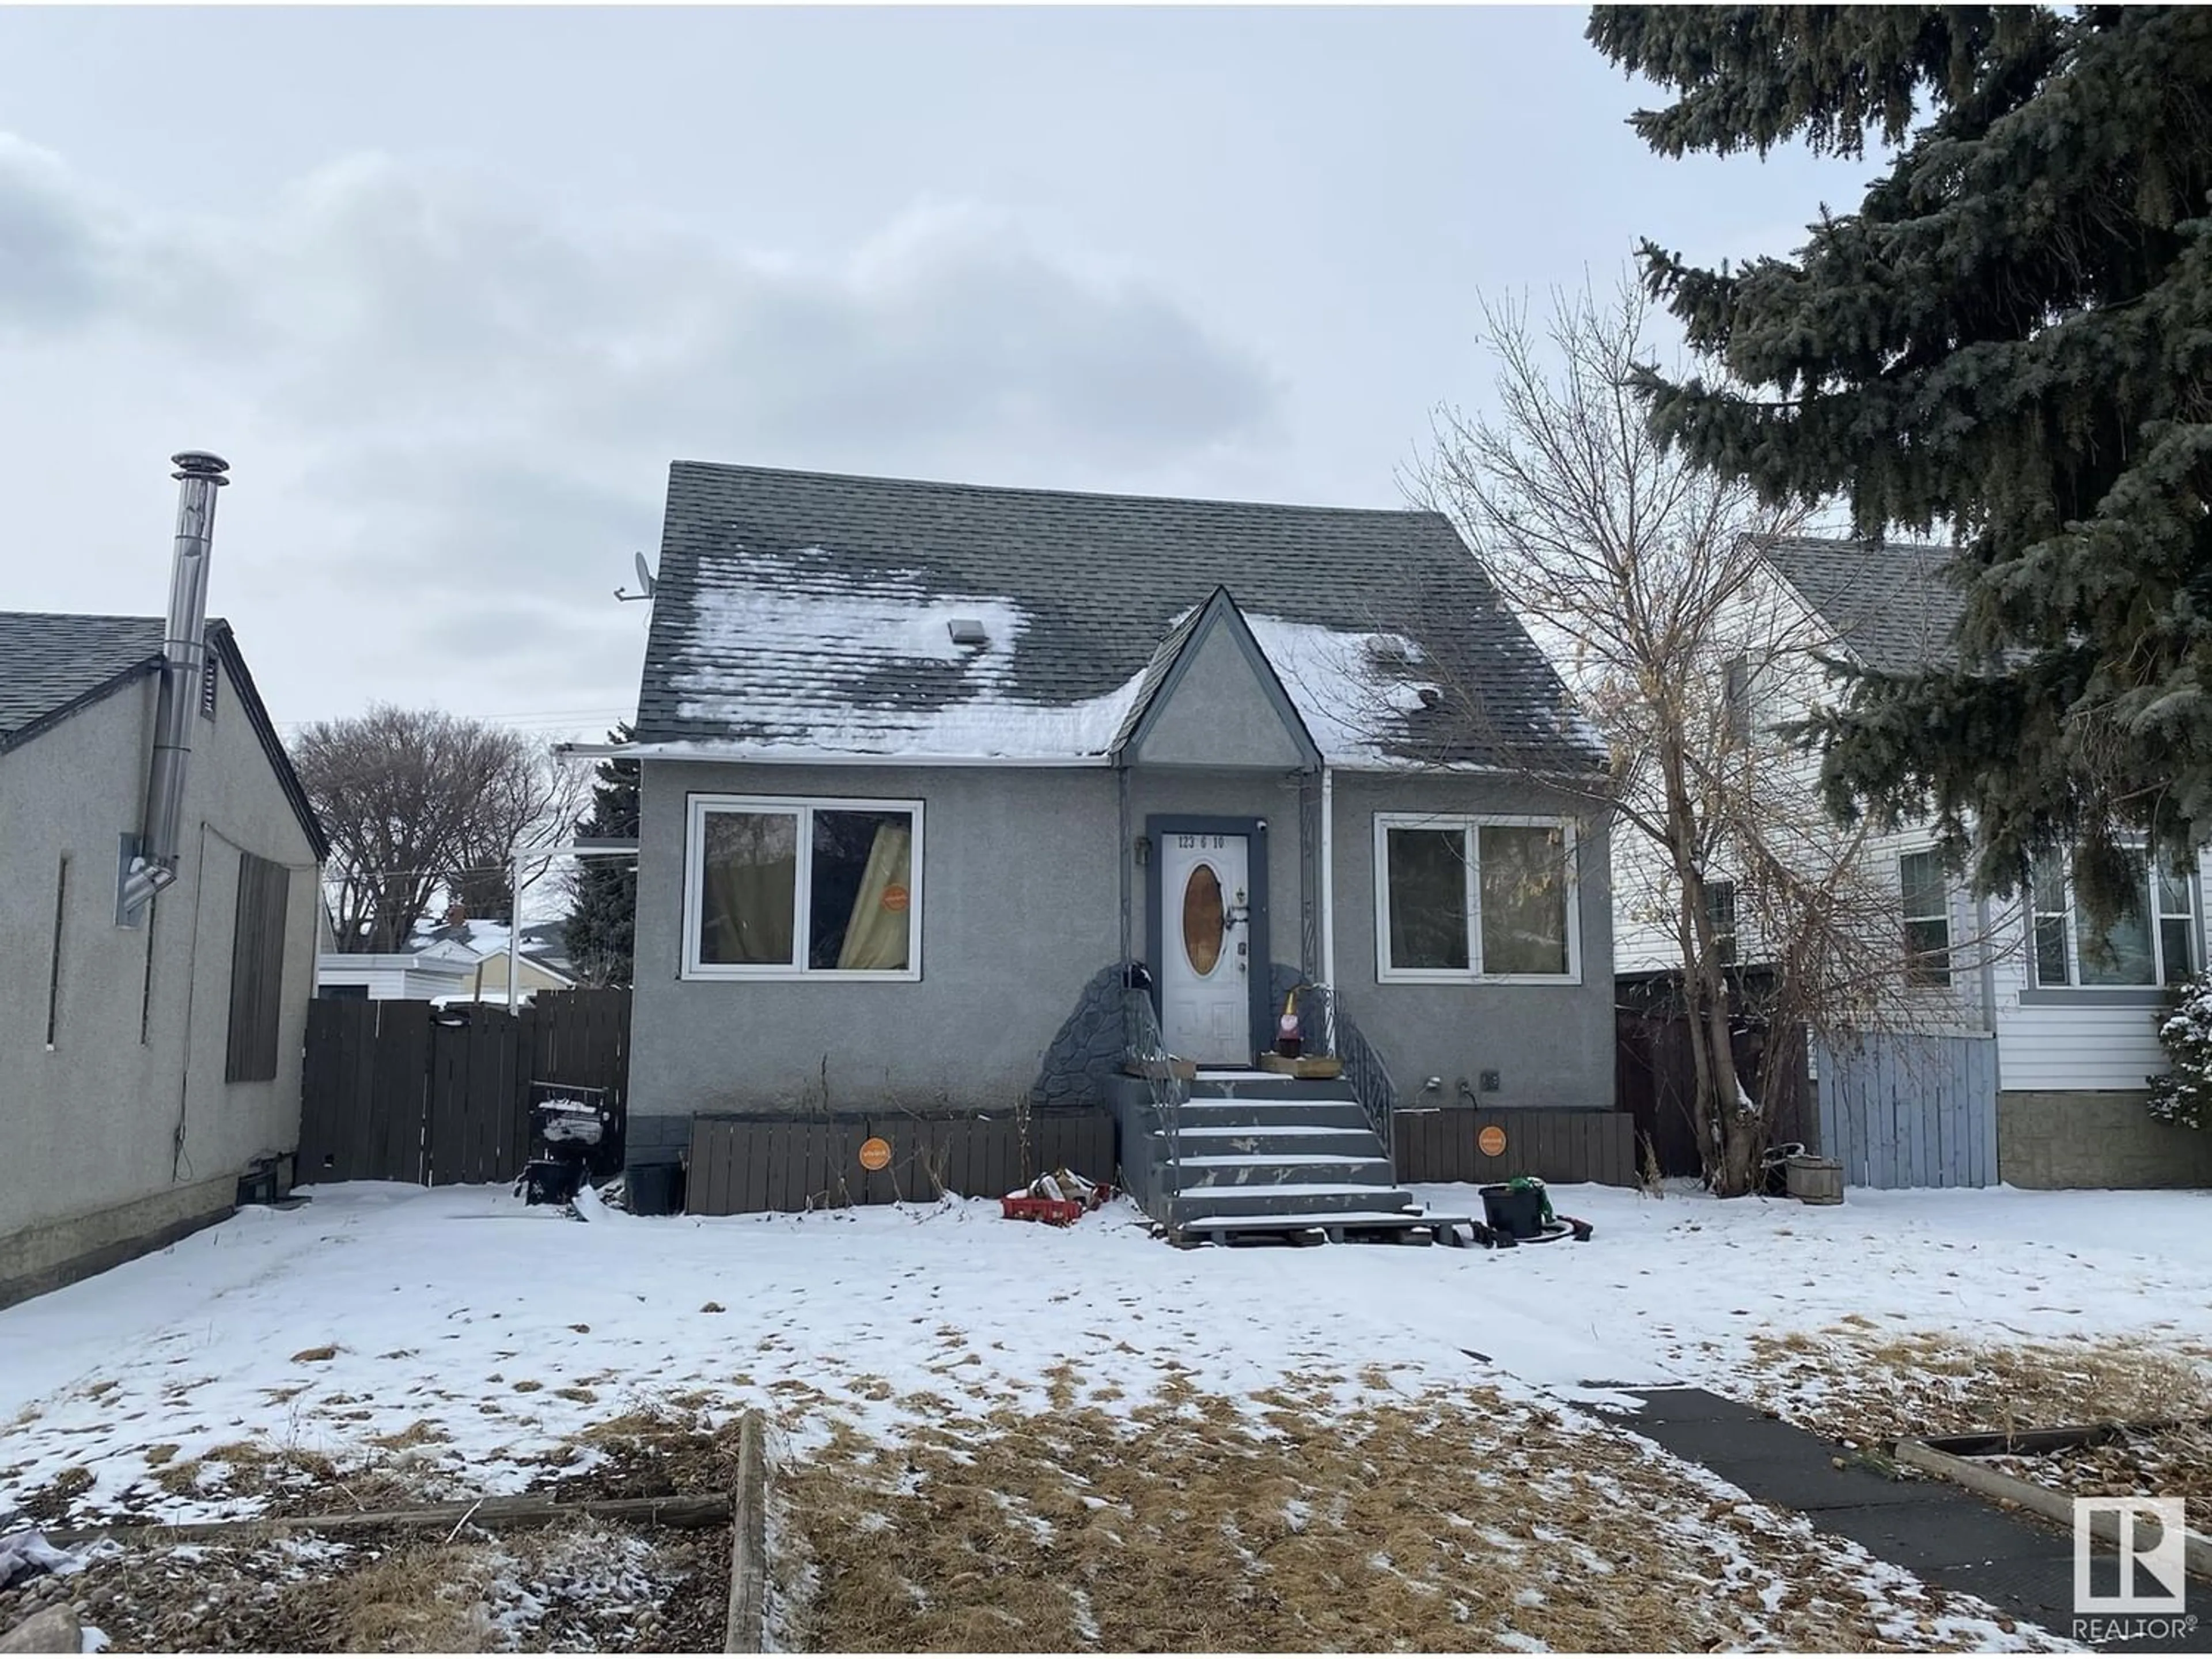 Frontside or backside of a home for 12326 103 ST NW, Edmonton Alberta T5G2K3